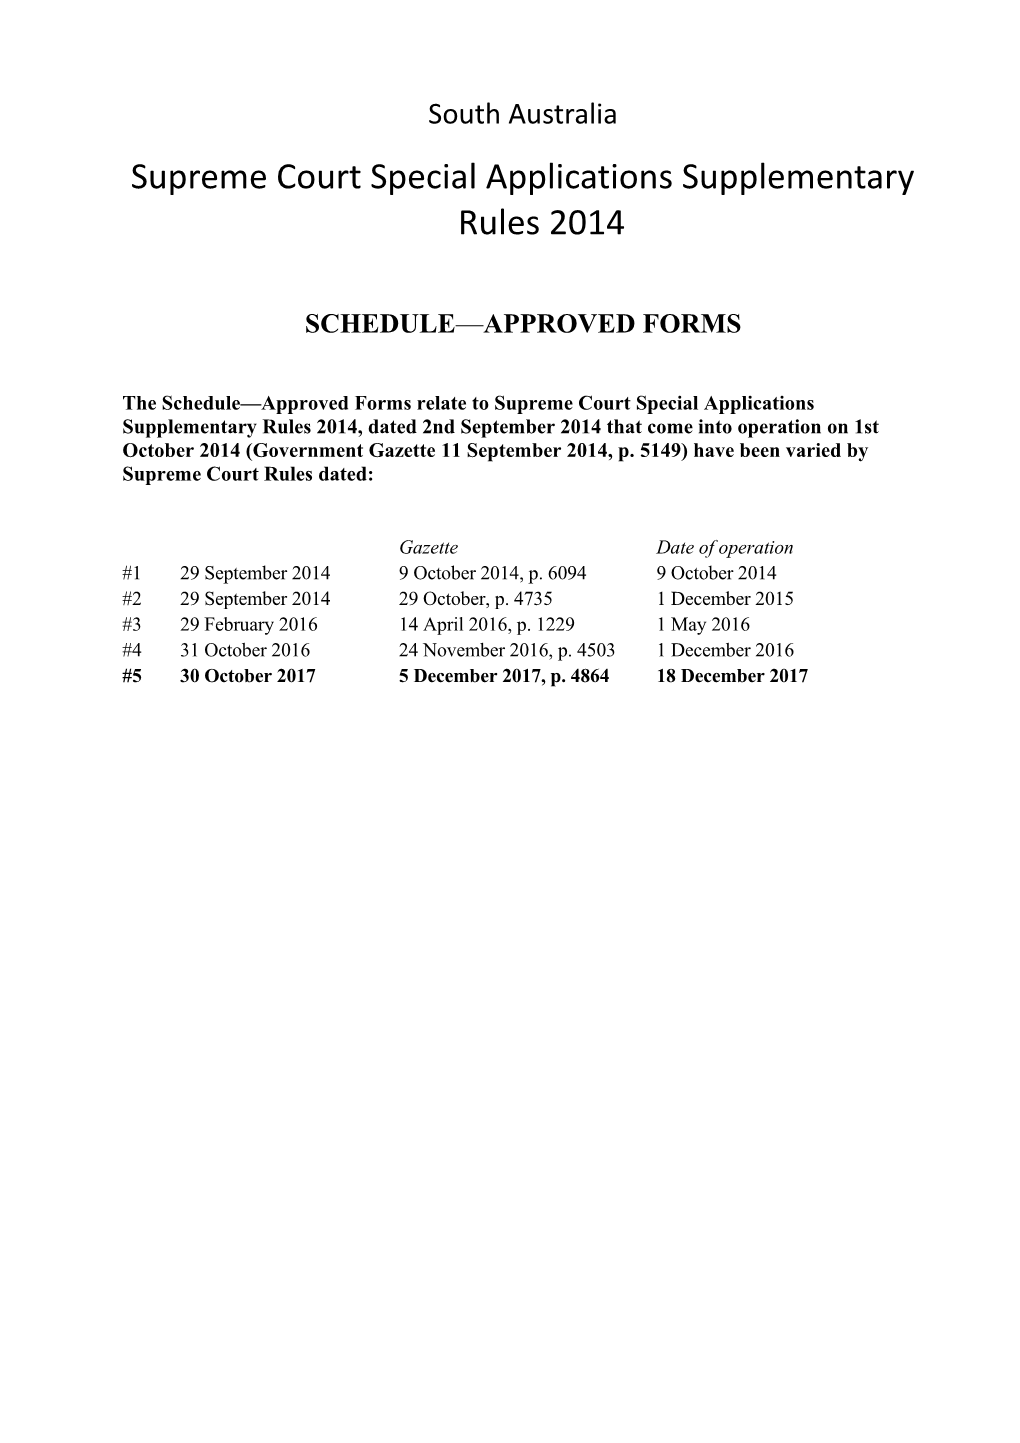 Supreme Court Special Applications Supplementary Rules 2014 - Schedule - Approved Forms